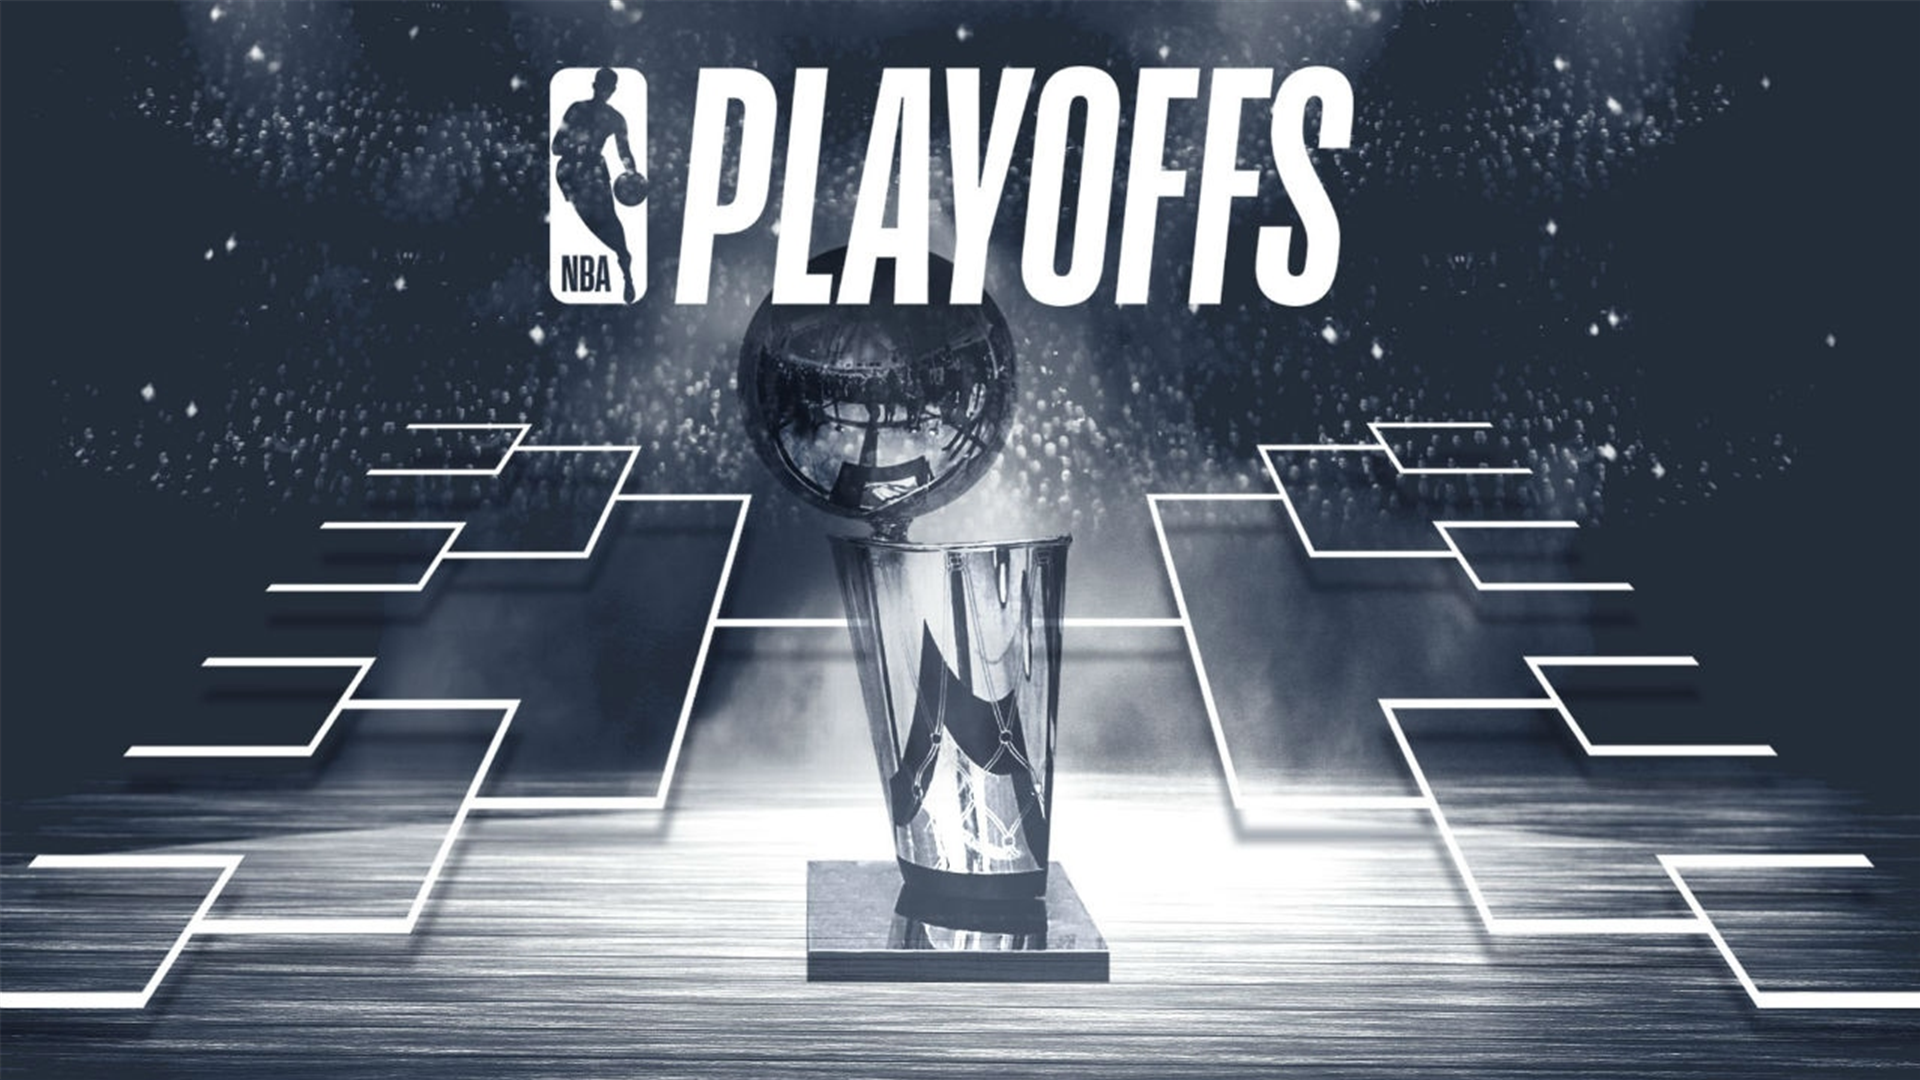 NBA Playoffs 2019: Complete first round schedule - TV times, channel, streaming ...